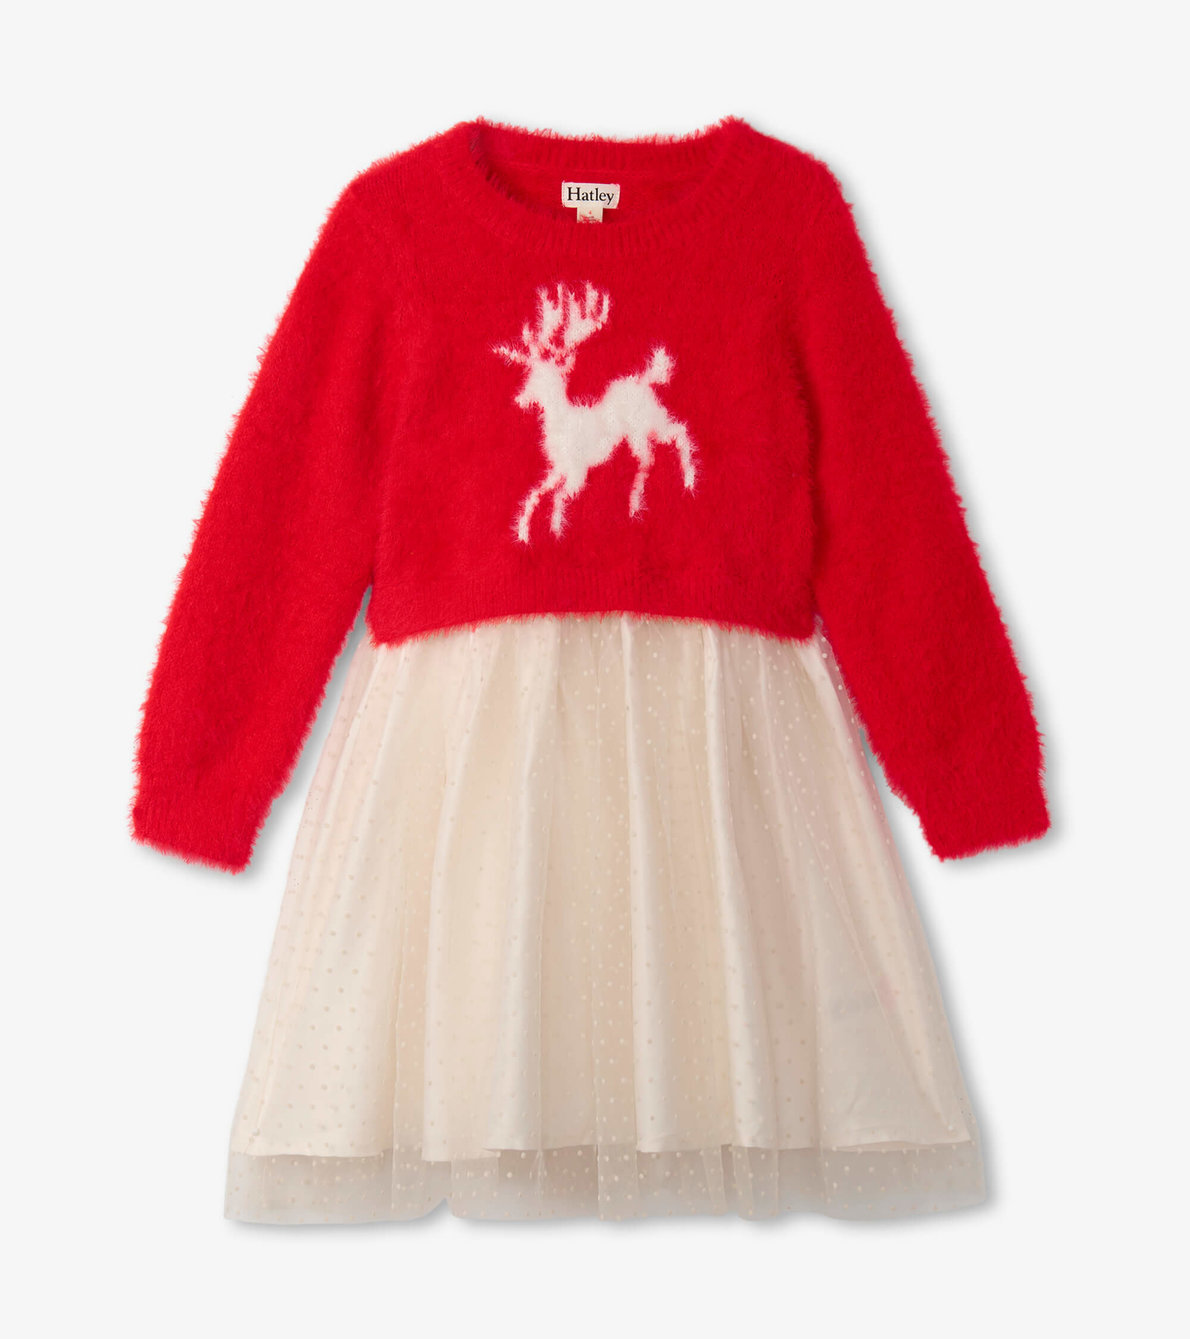 View larger image of Girls Holiday Deer Mix Media Dress